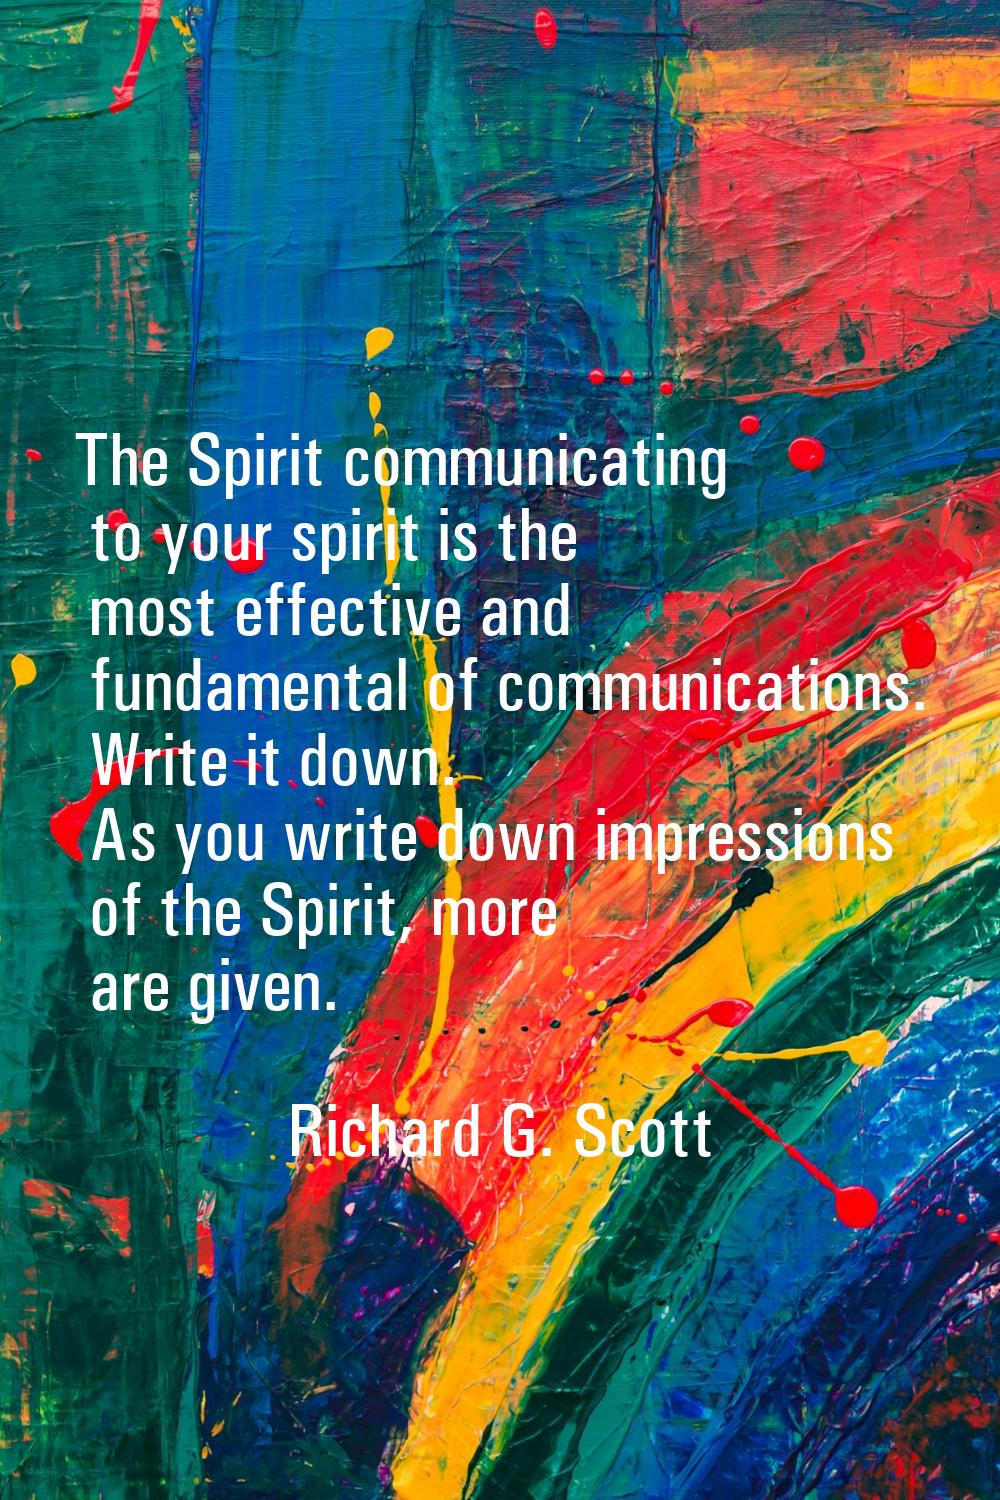 The Spirit communicating to your spirit is the most effective and fundamental of communications. Wr